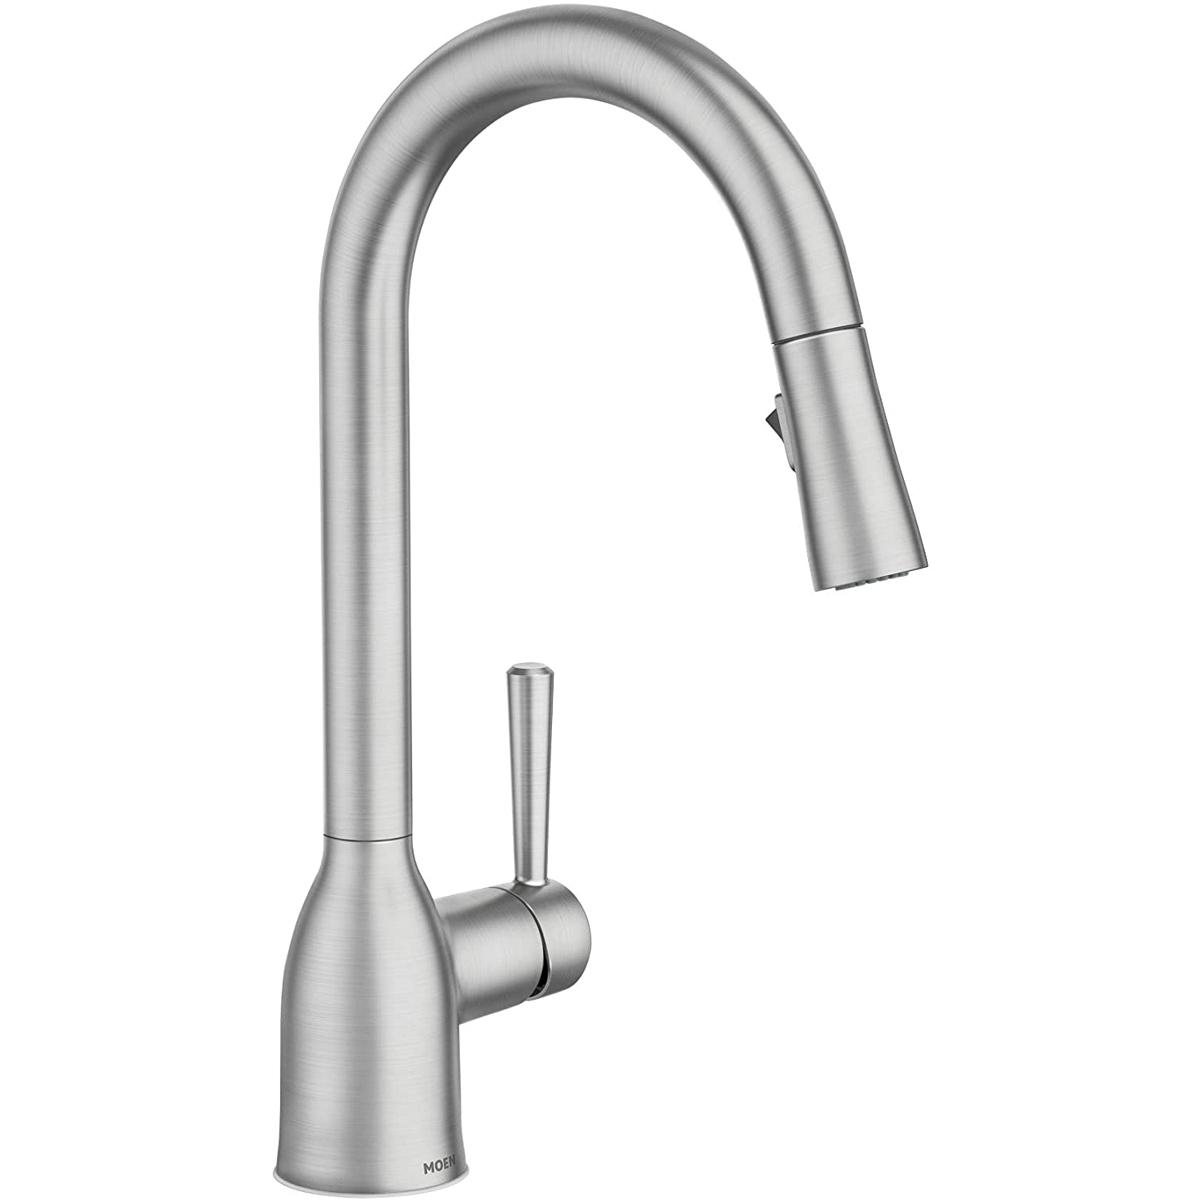 Moen Brantford One-Handle High Arc Pulldown Kitchen Faucet for $106.47 Shipped